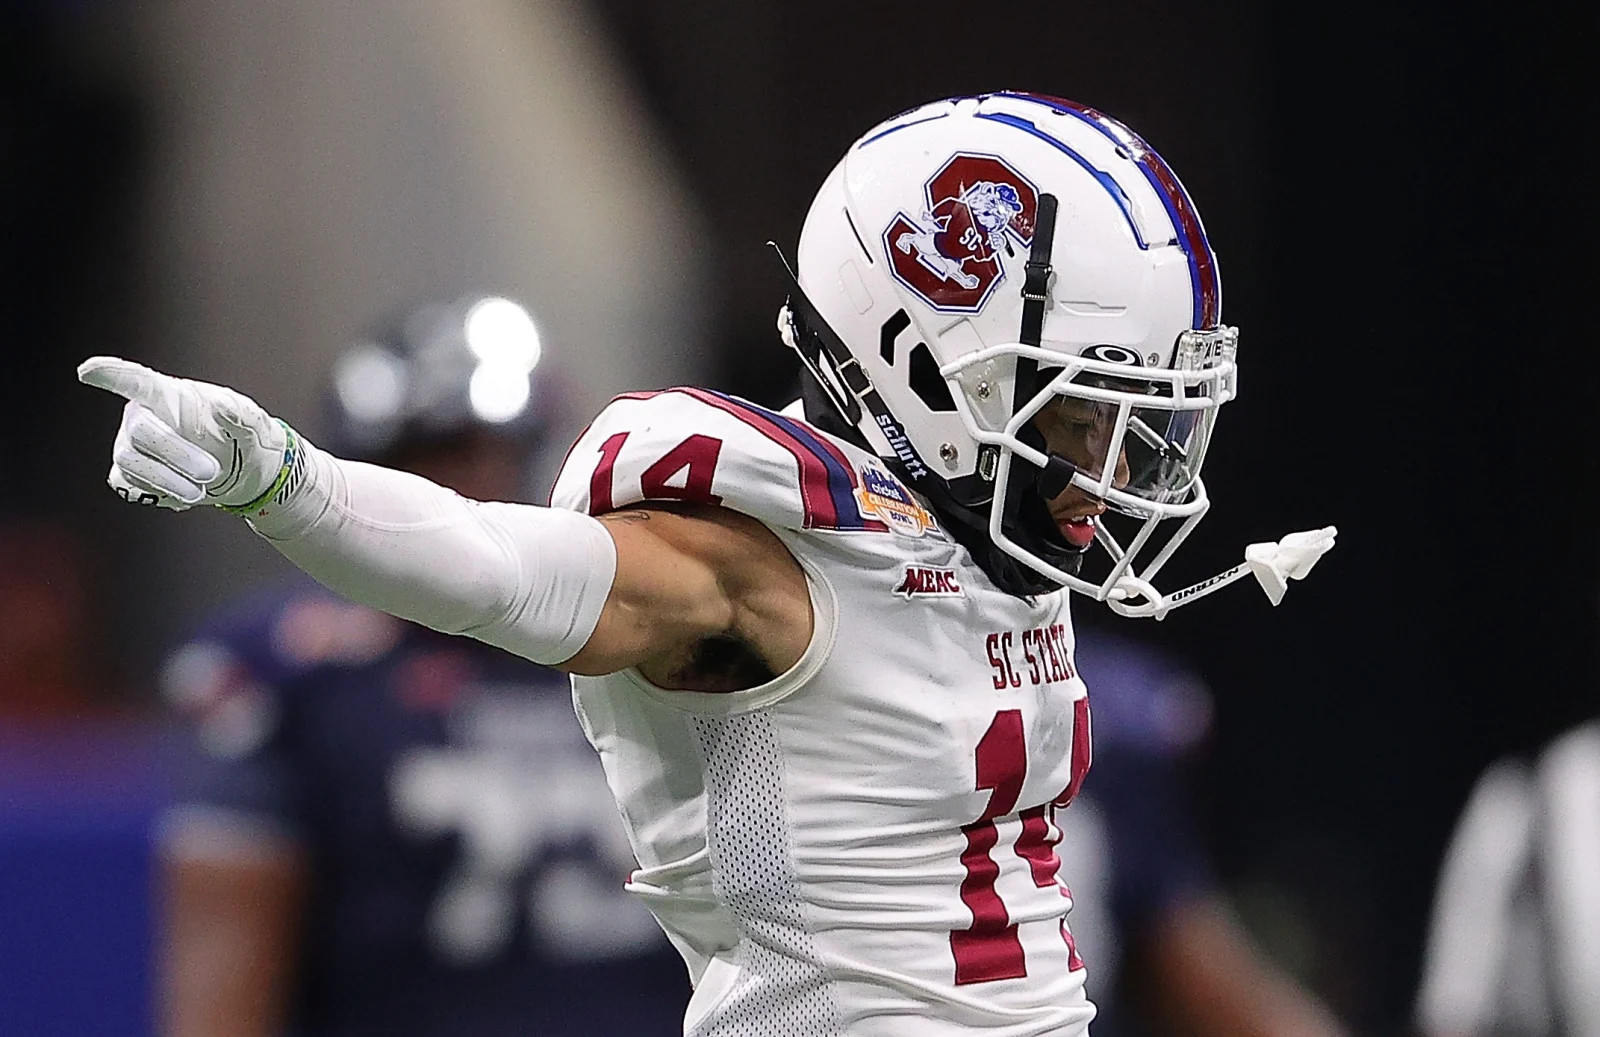 WATCH: Rams Select South Carolina St. CB Decobie Durant at No. 142 in NFL Draft